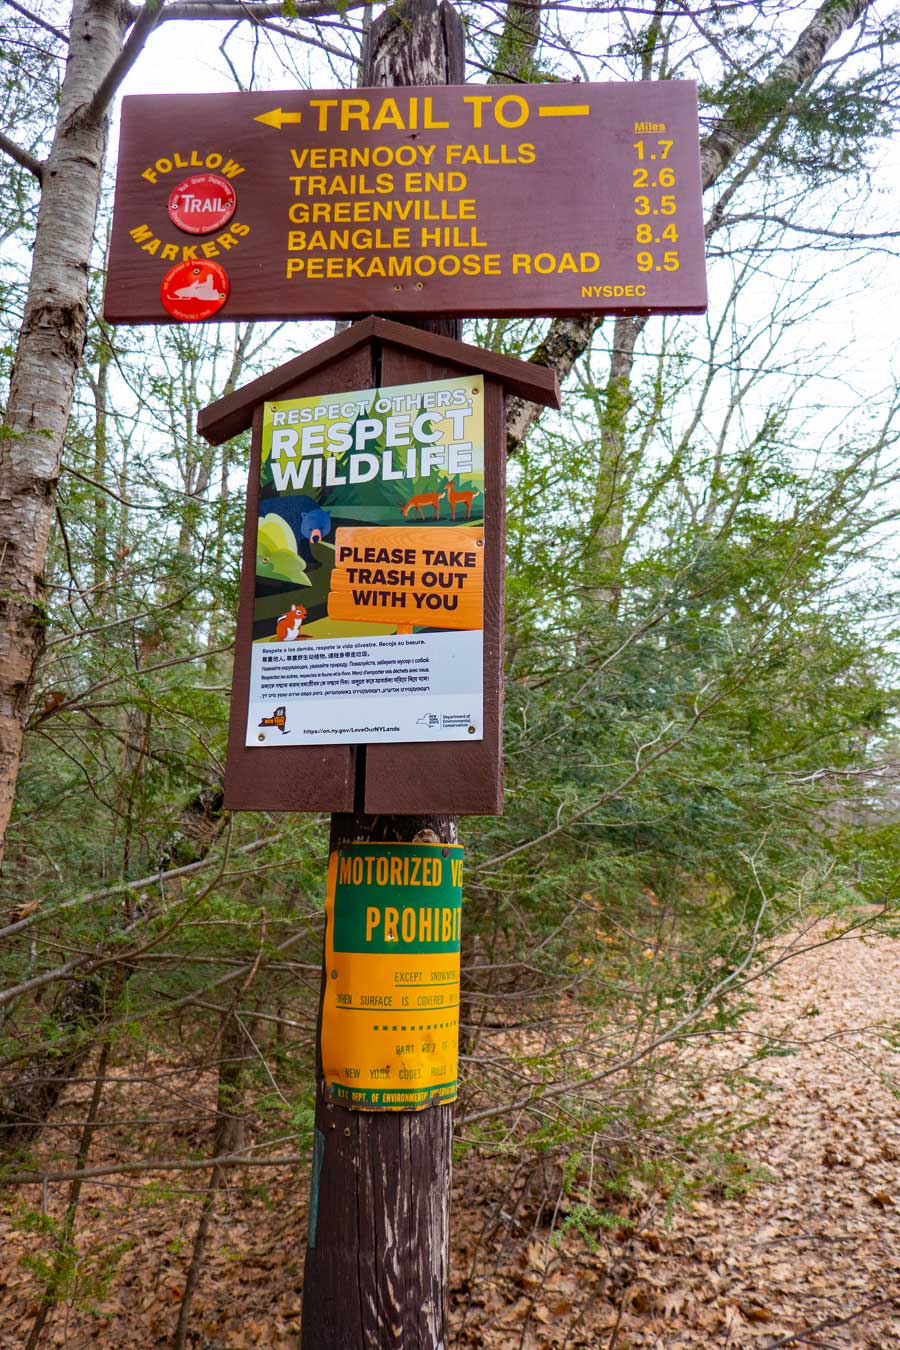 Trail mileage sign at the Trail head for Upper Cherrytown Trail (east)